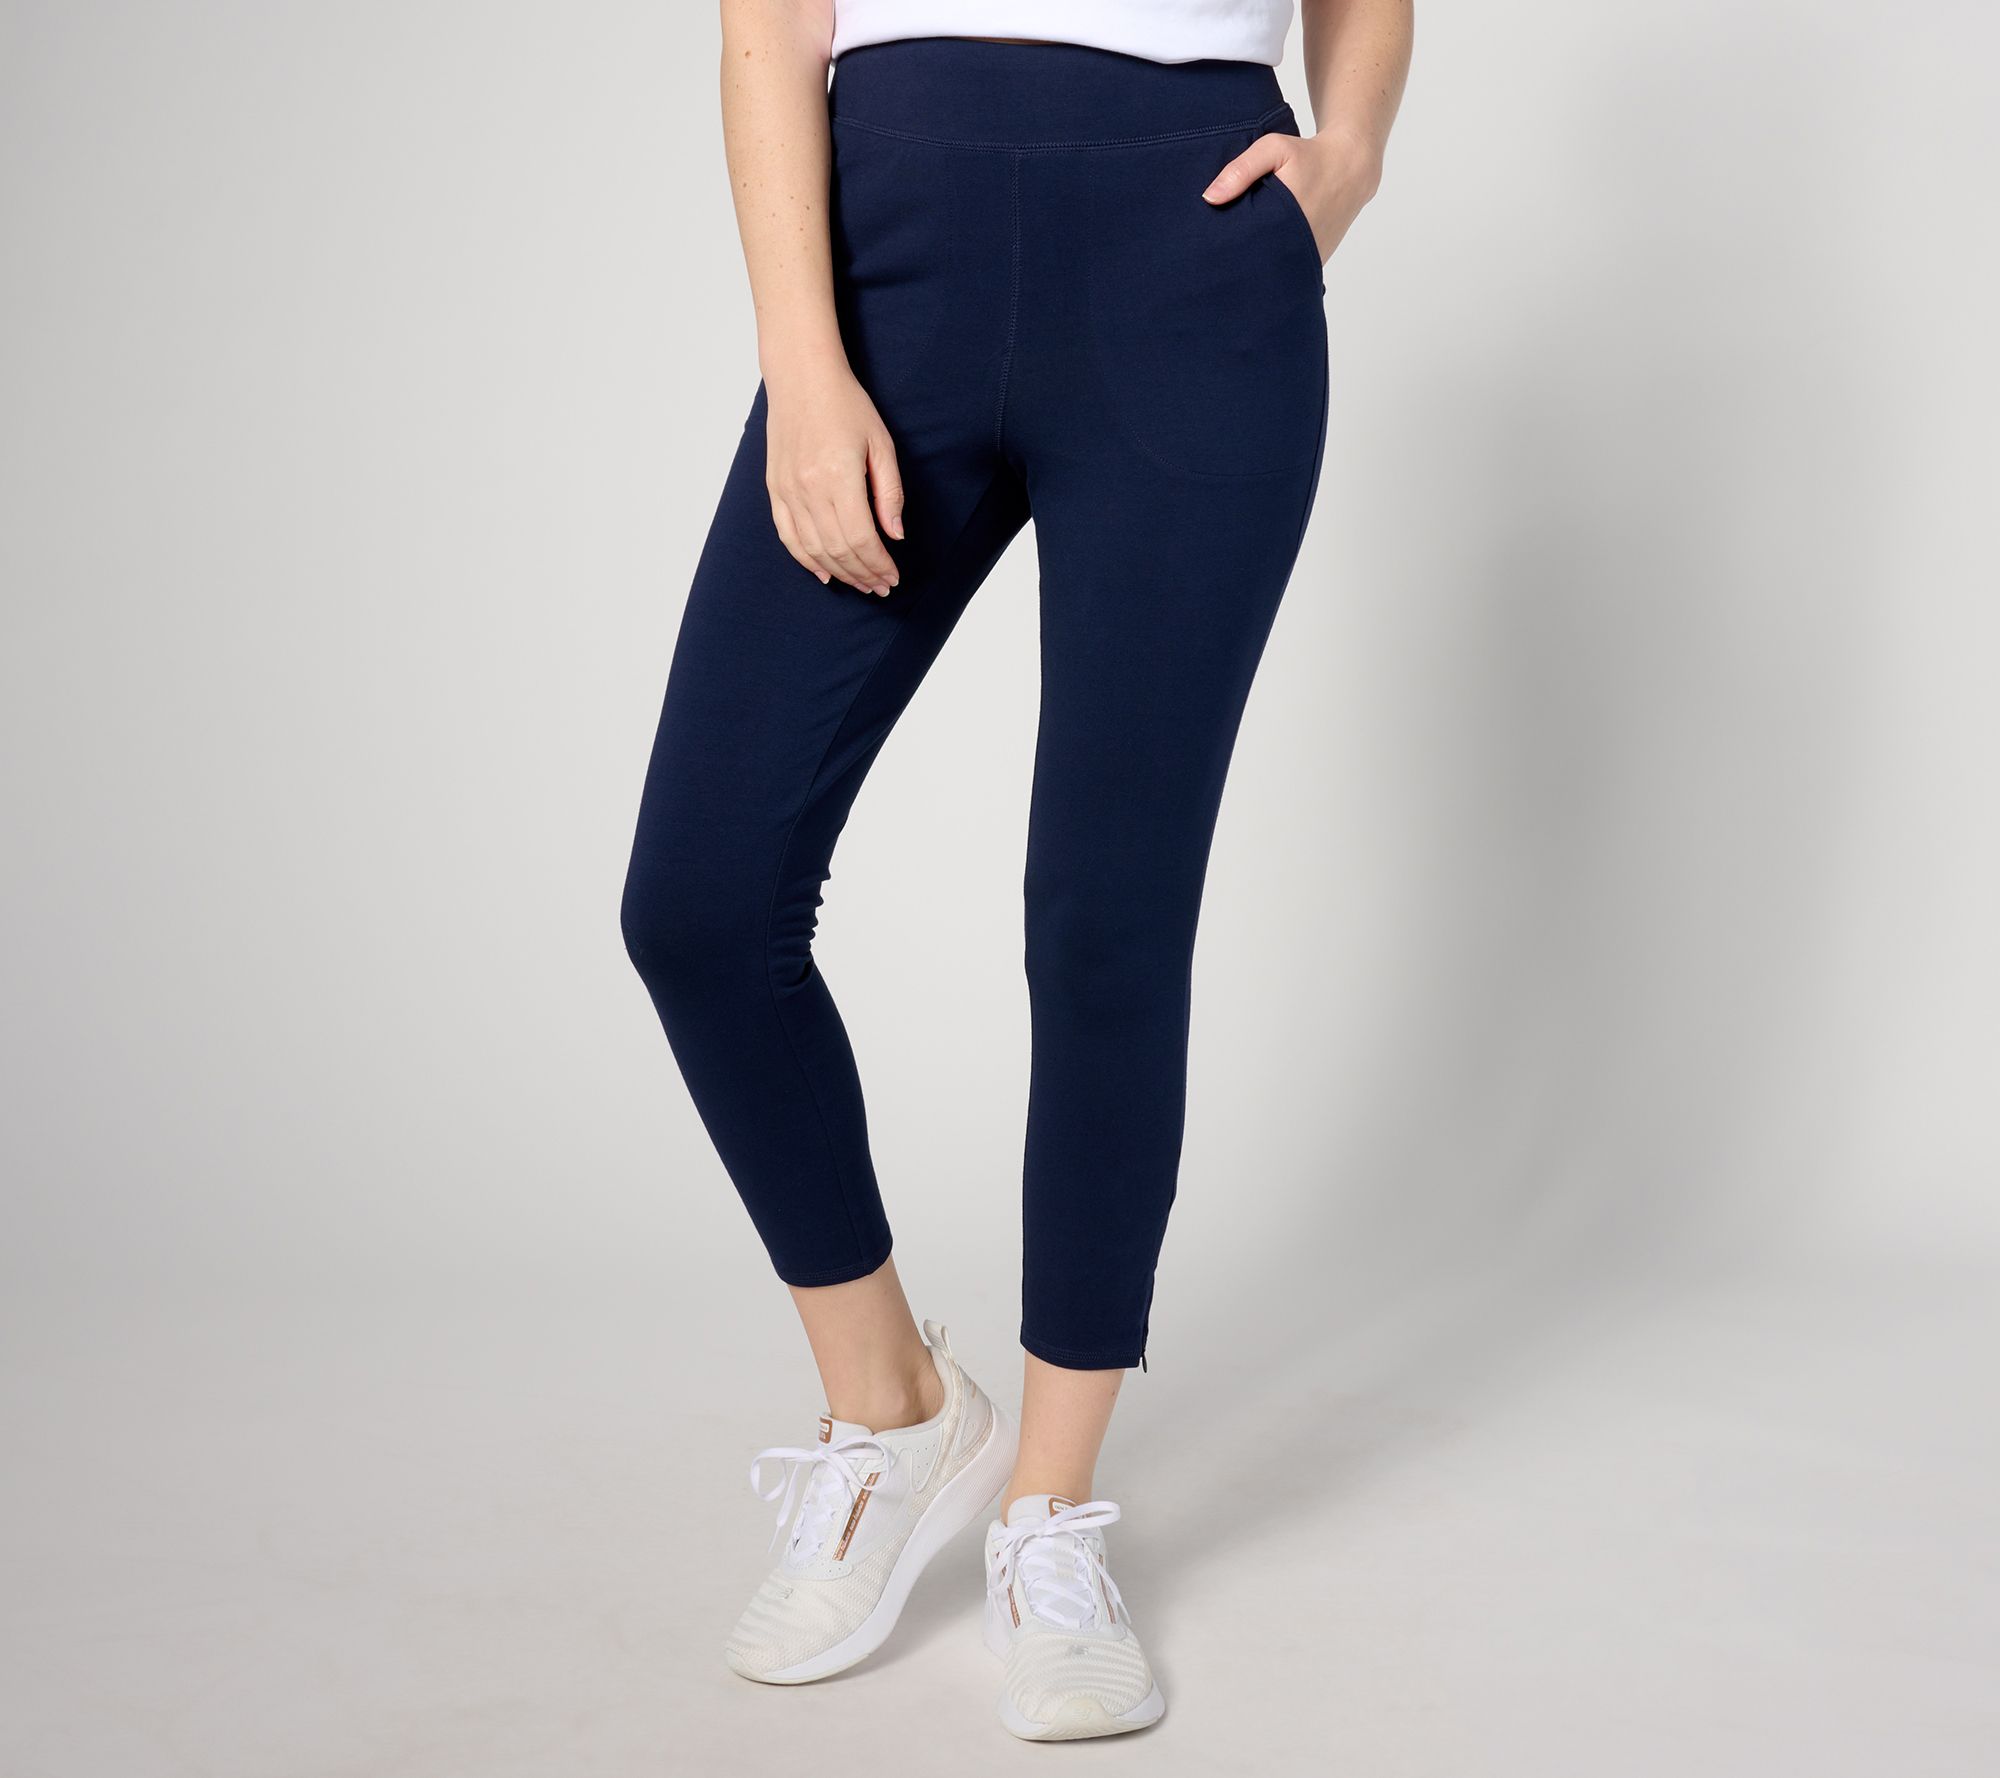 Xersion Ankle Zip Athletic Pants for Women